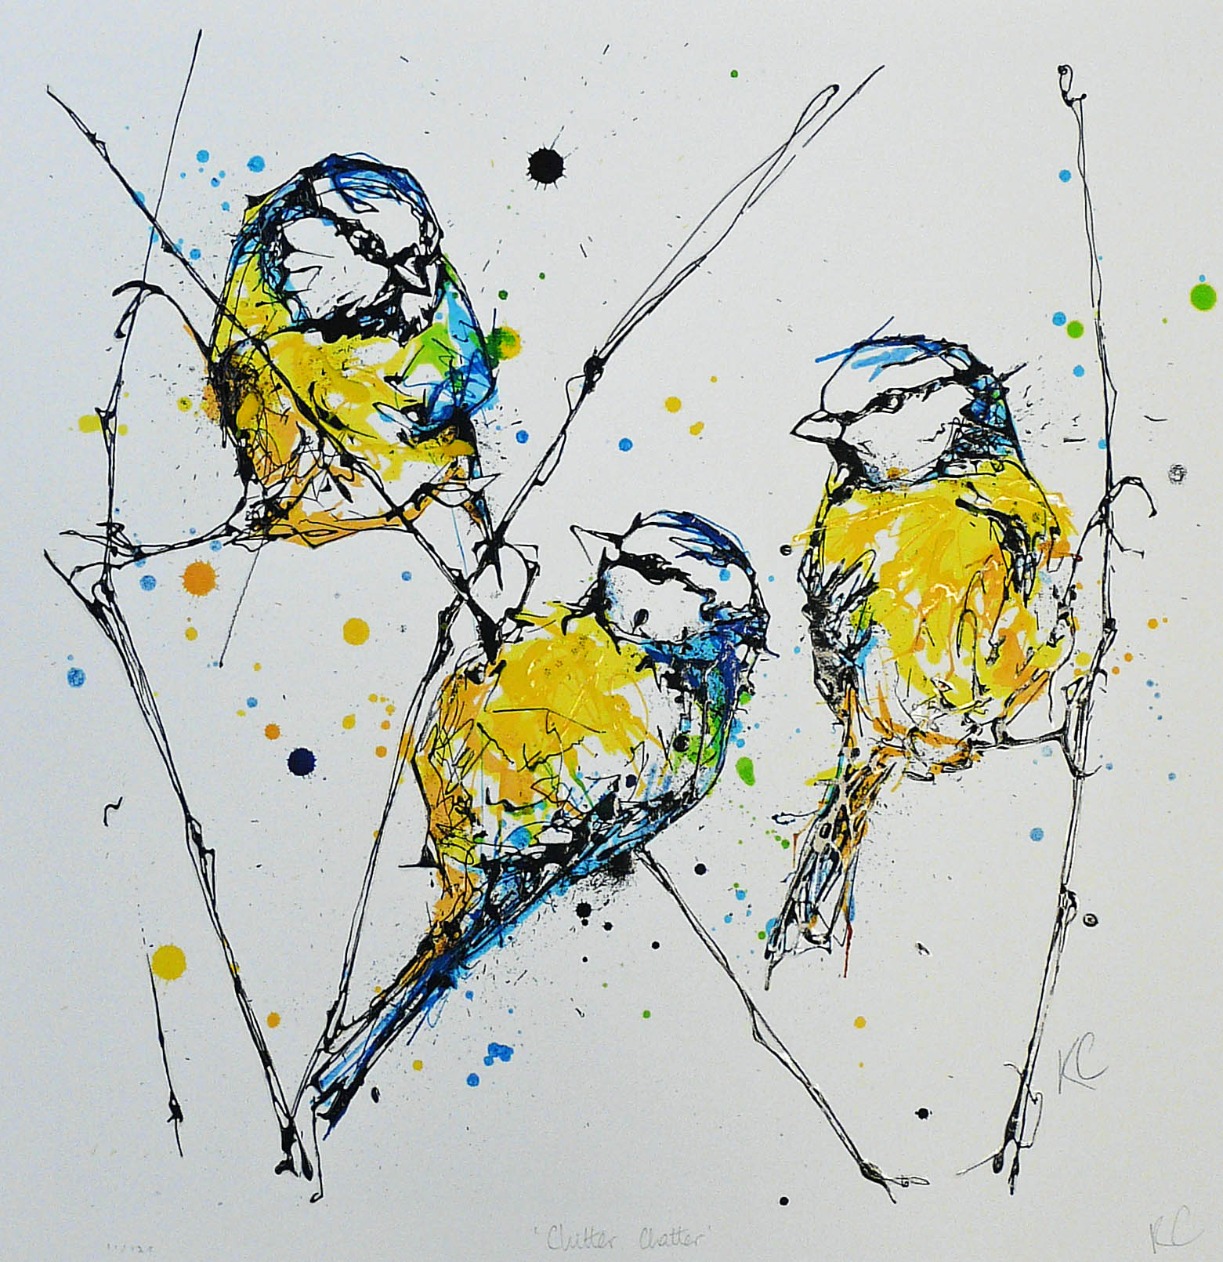 Chitter Chatter by Kathryn Callaghan, Bird | Animals | Abstract